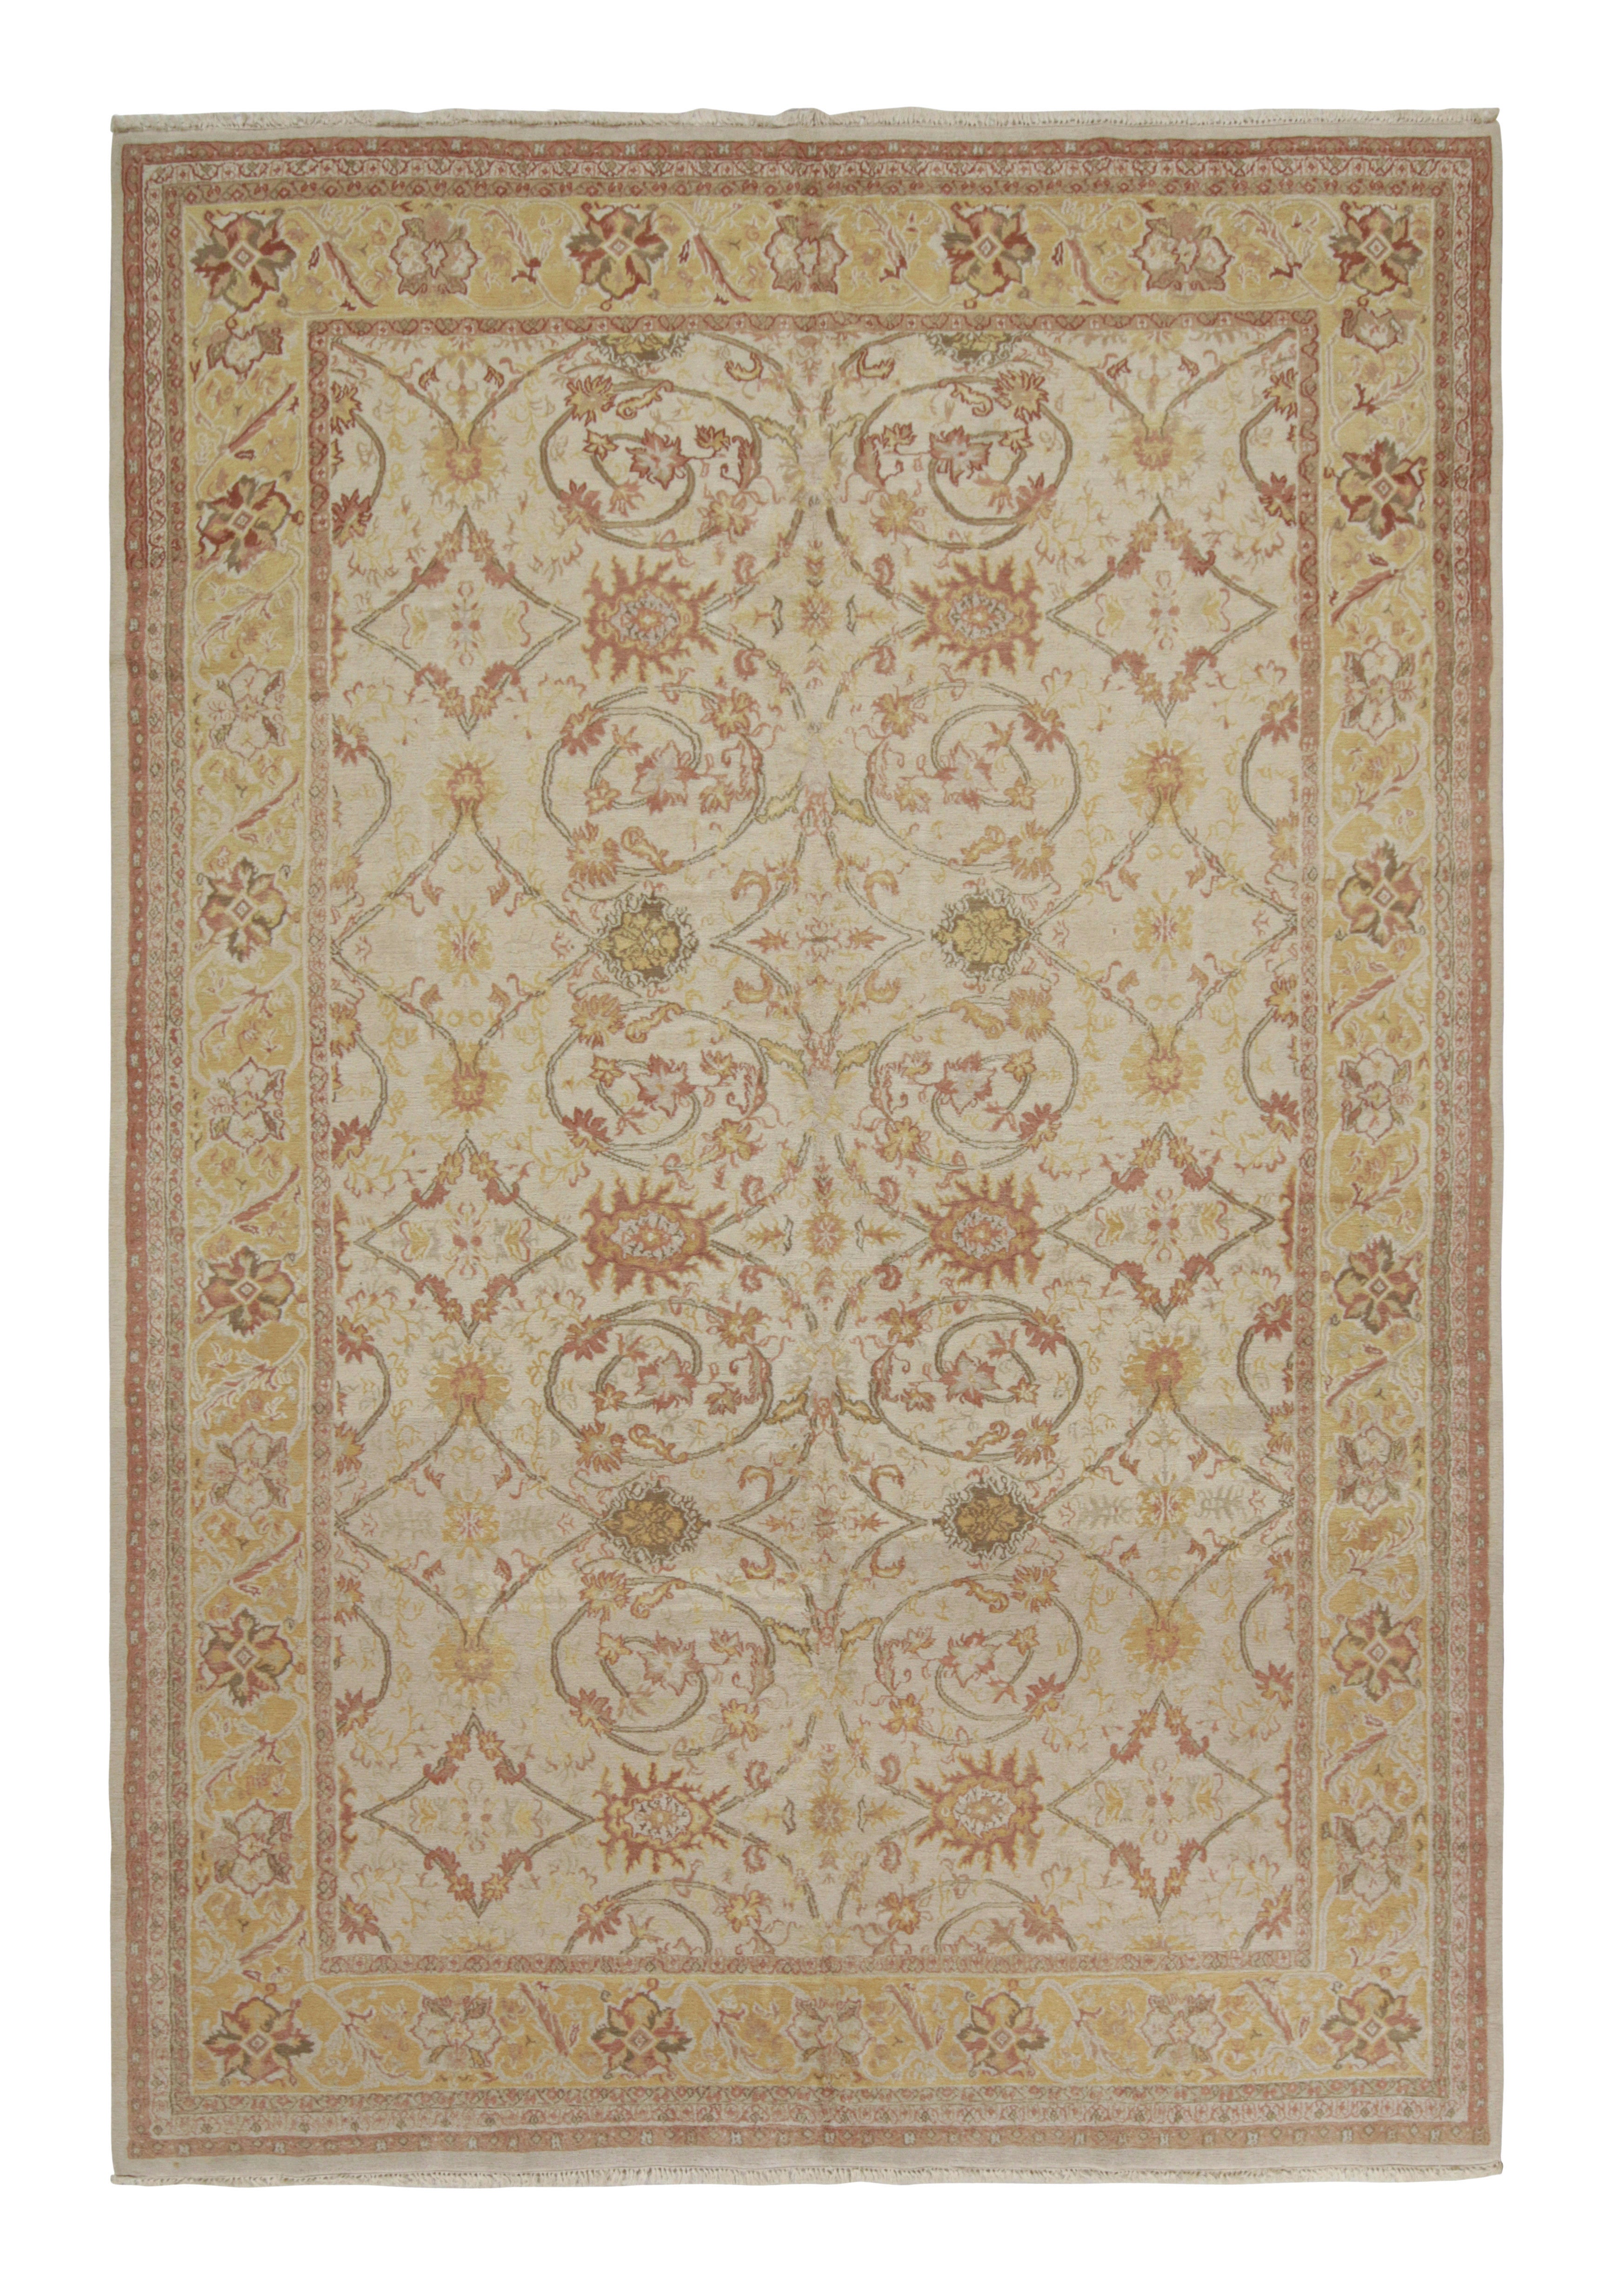 Rug & Kilim’s Sultanabad style rug in Cream with Floral Patterns